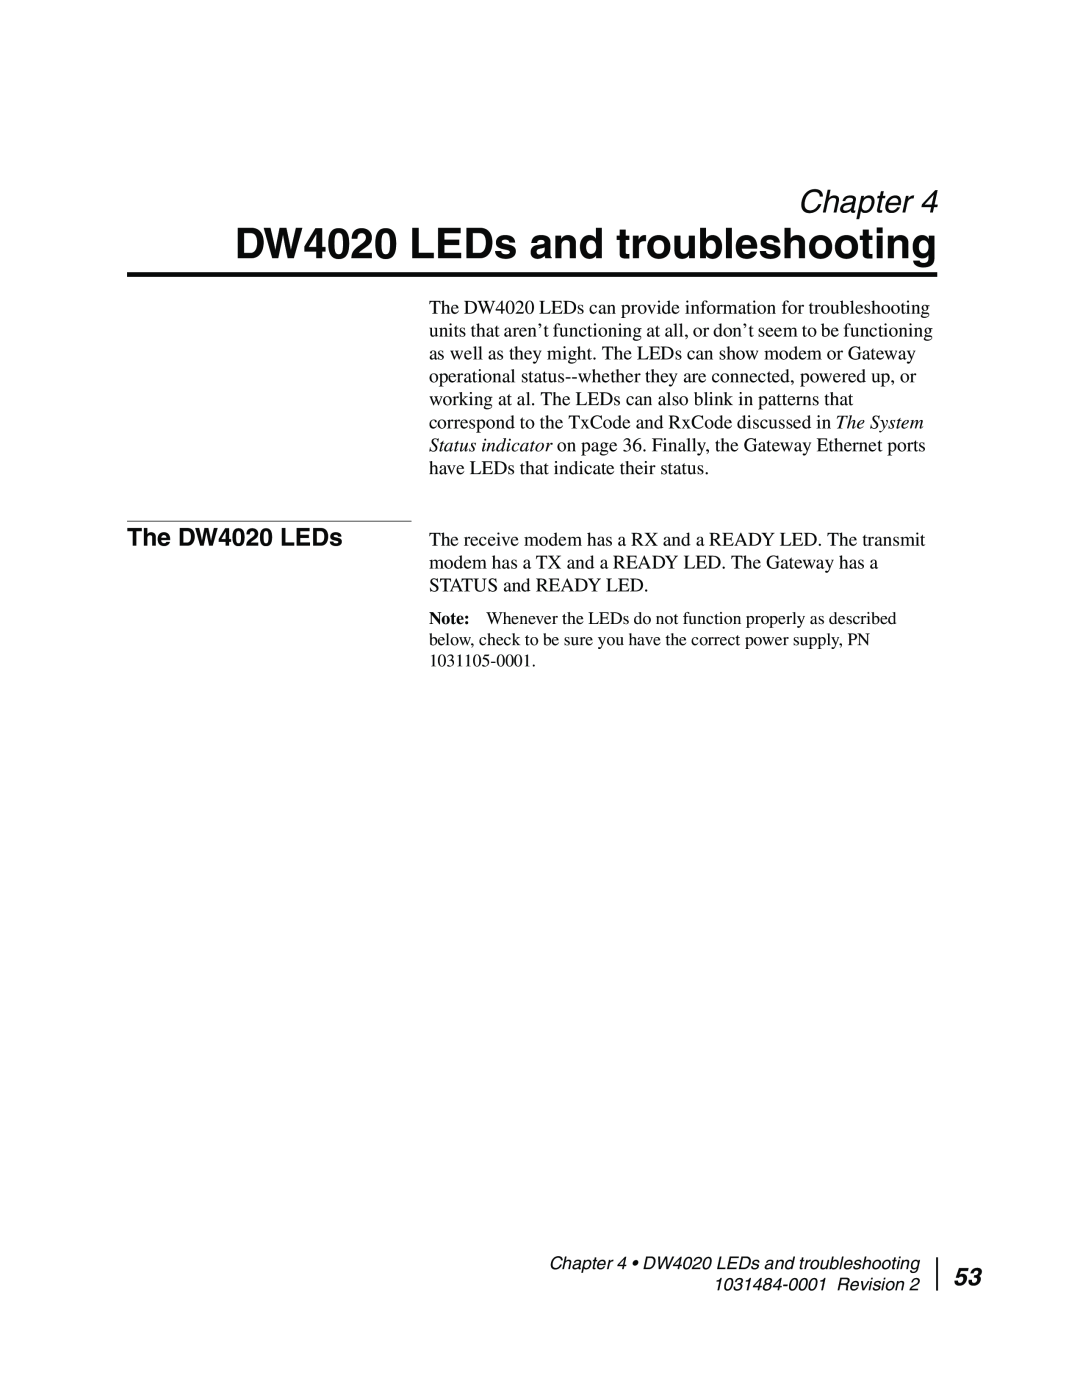 Hughes manual DW4020 LEDs and troubleshooting, The DW4020 LEDs, Chapter 